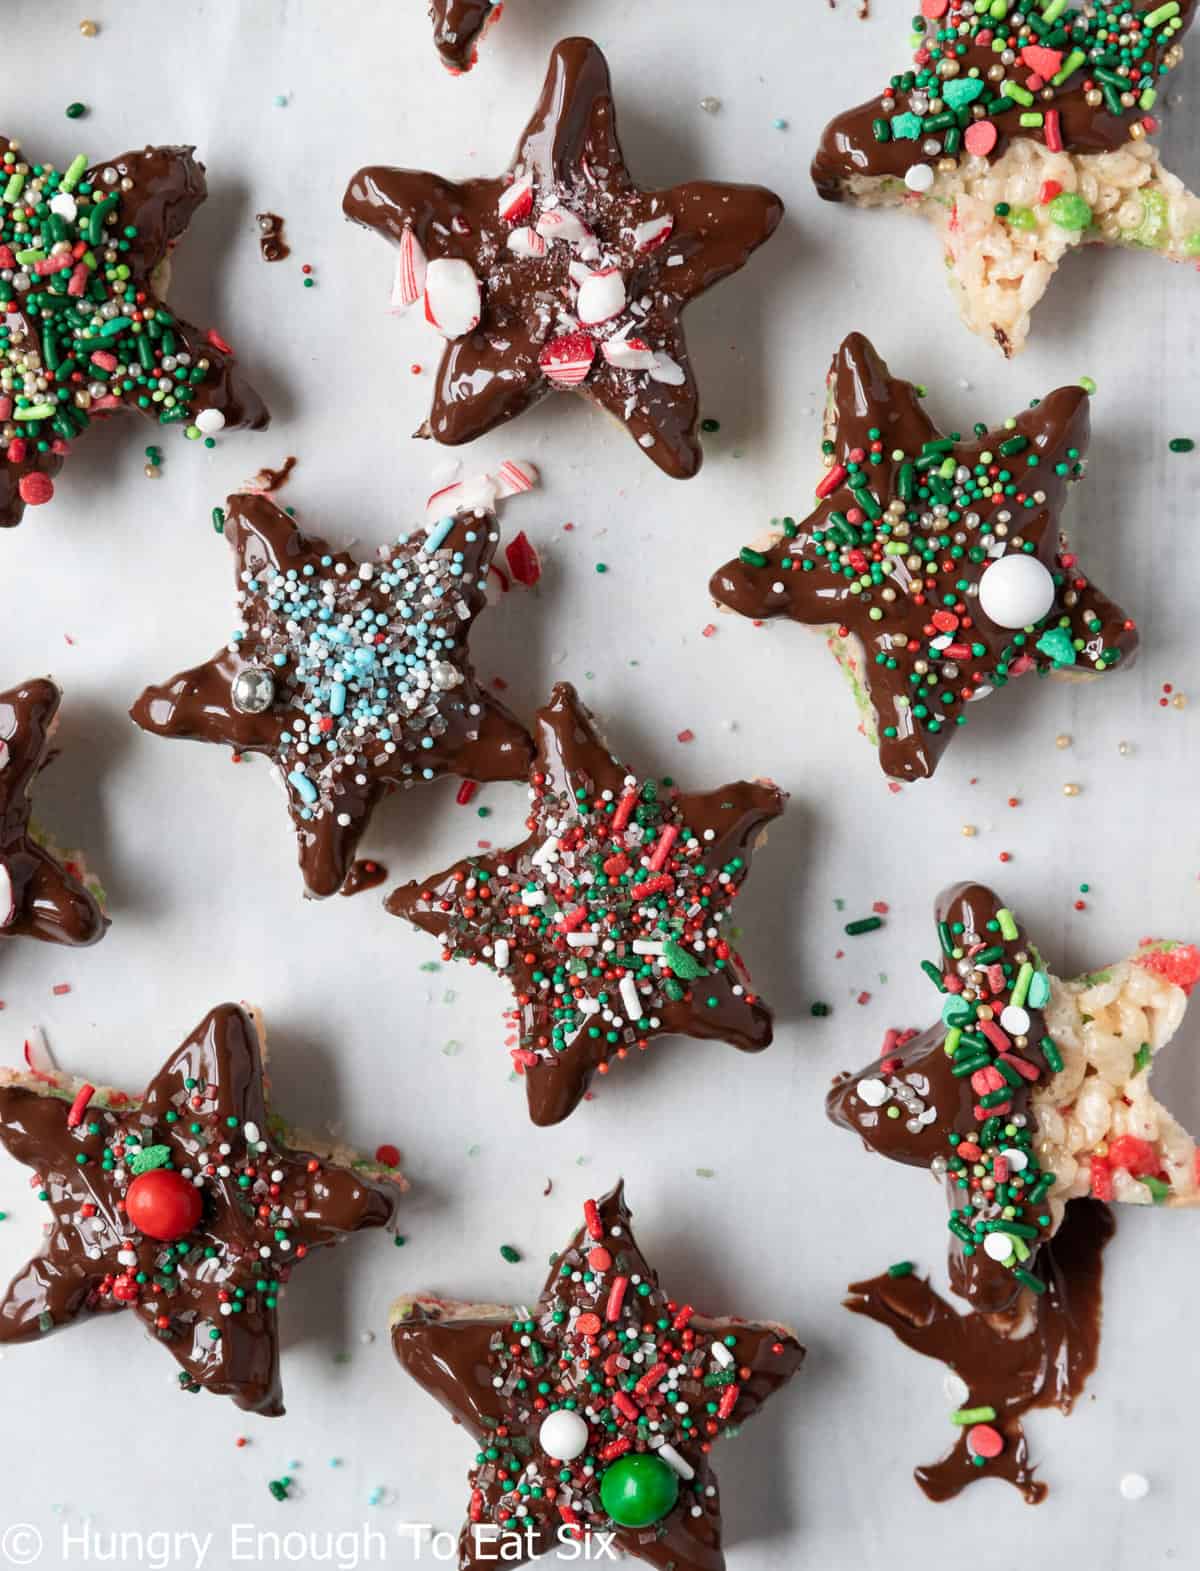 Marshmallow star-shaped treats with melted chocolate.